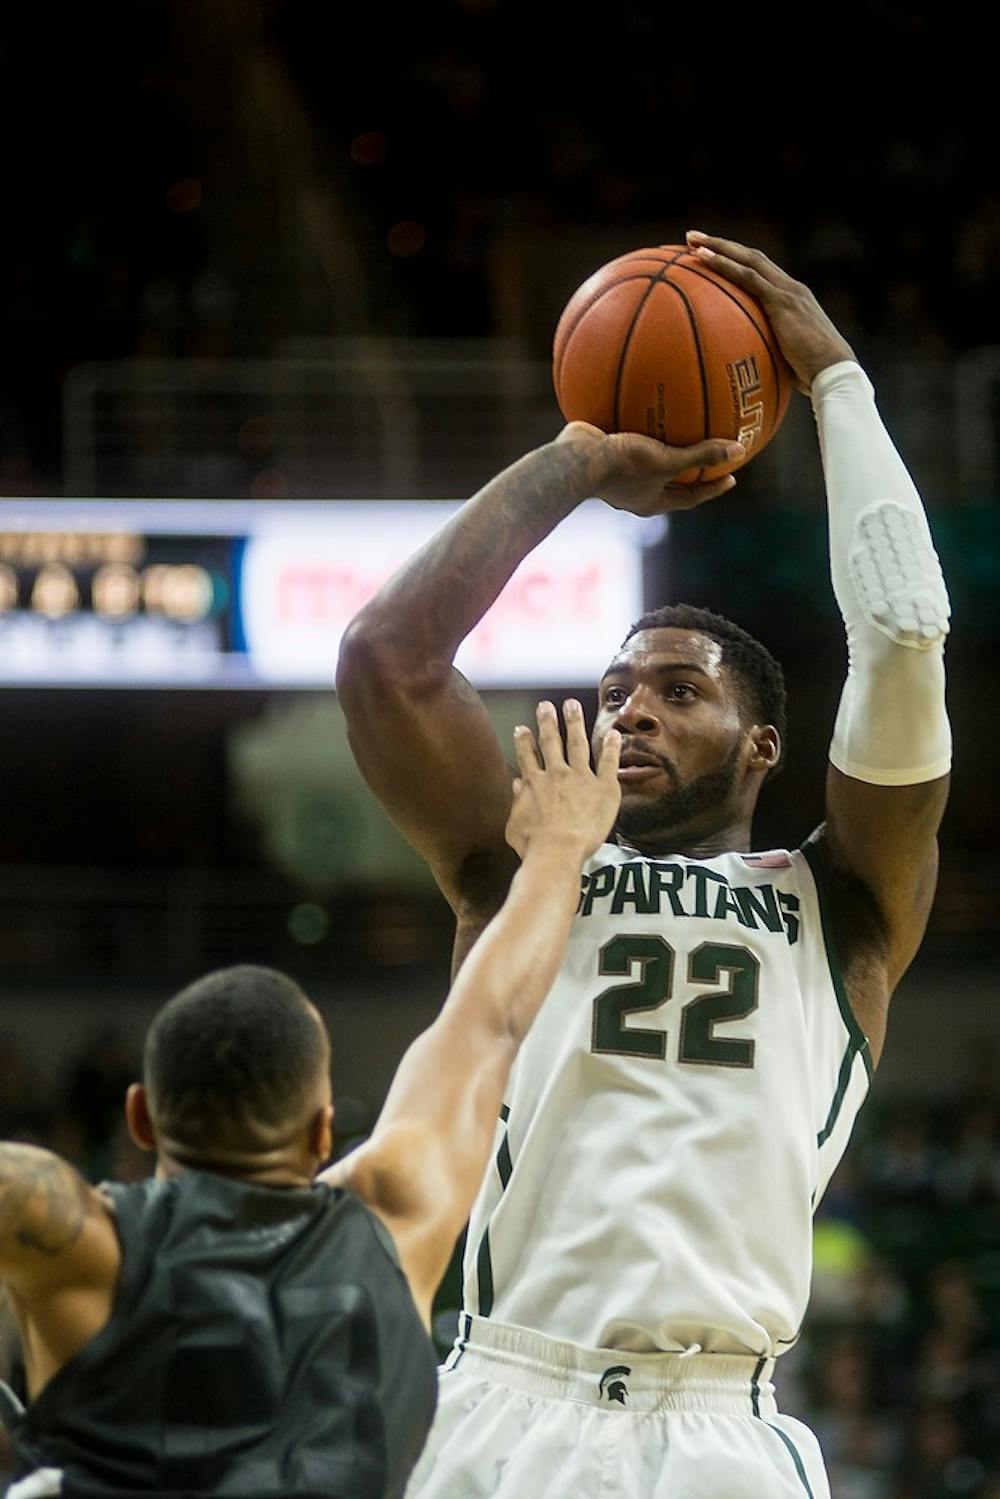 <p>Senior forward/guard Branden Dawson attempts a point over Oakland forward Tommie McCune Dec. 14, 2014, during a game against Oakland at Breslin Center. The Spartans were leading the Golden Grizzlies at halftime, 44-31. Erin Hampton/The State News</p>